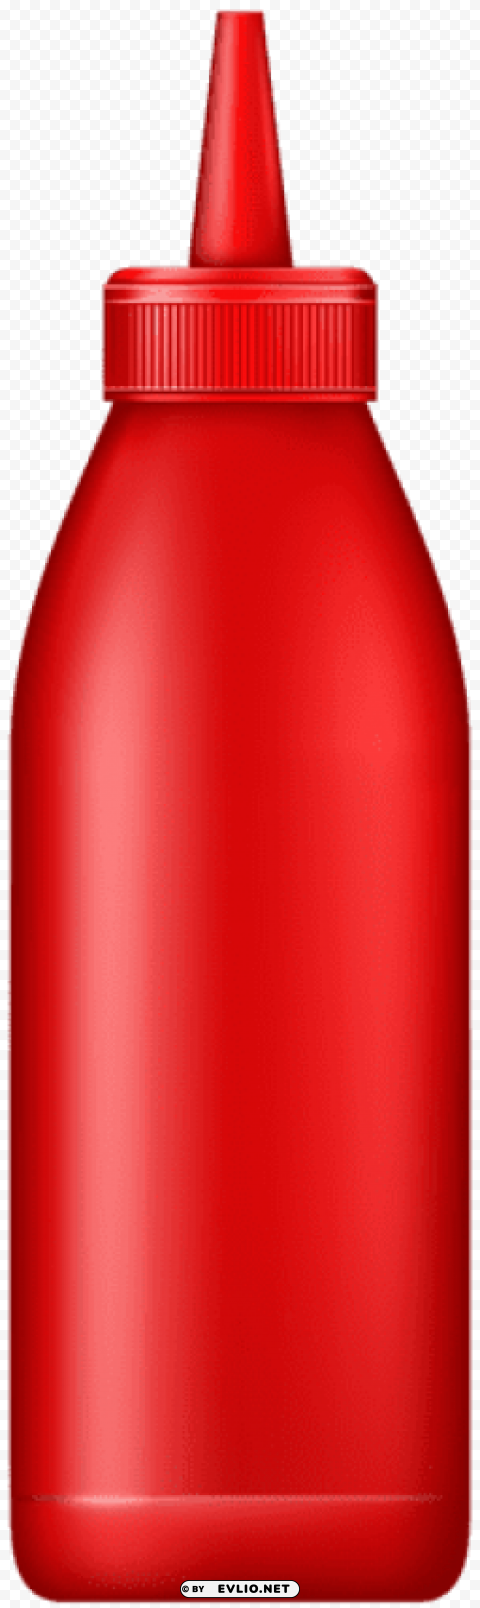 ketchup bottle Isolated Element in Transparent PNG